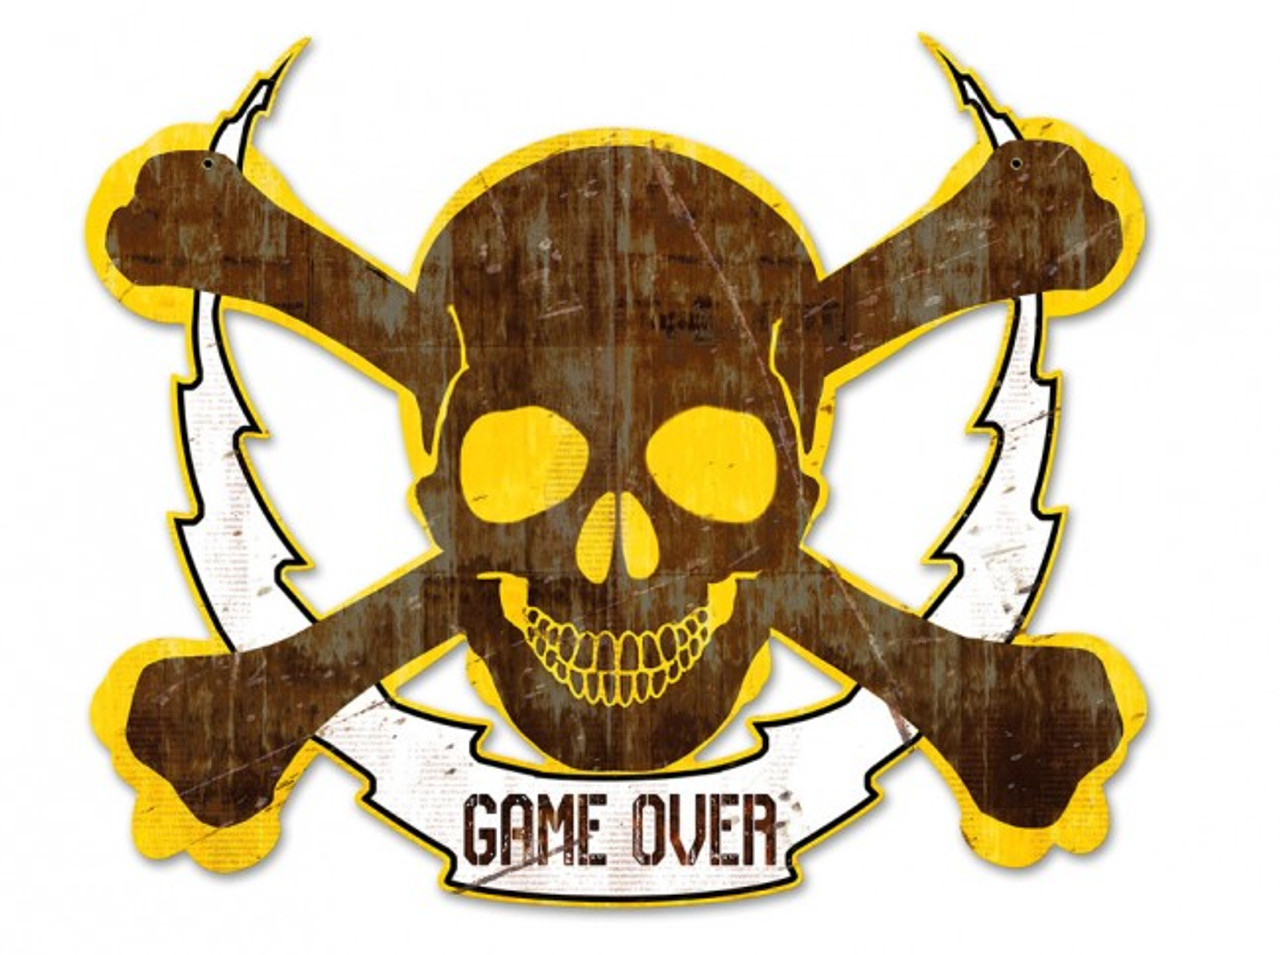 Skull Bolt Game Over Metal Sign 19 x 16 Inches